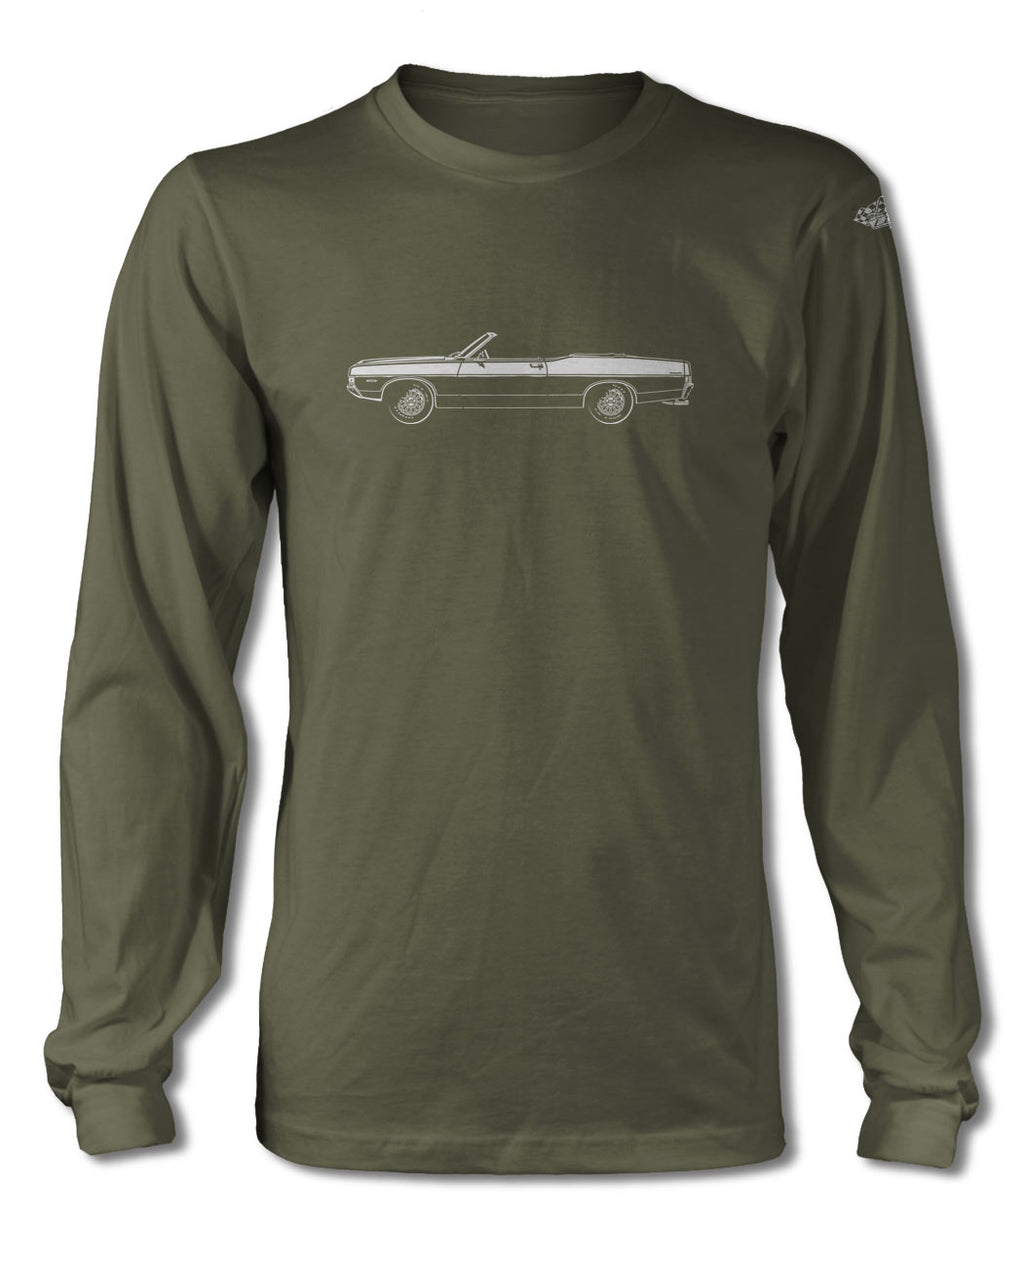 1968 Ford Torino GT Convertible T-Shirt - Long Sleeves - Side View